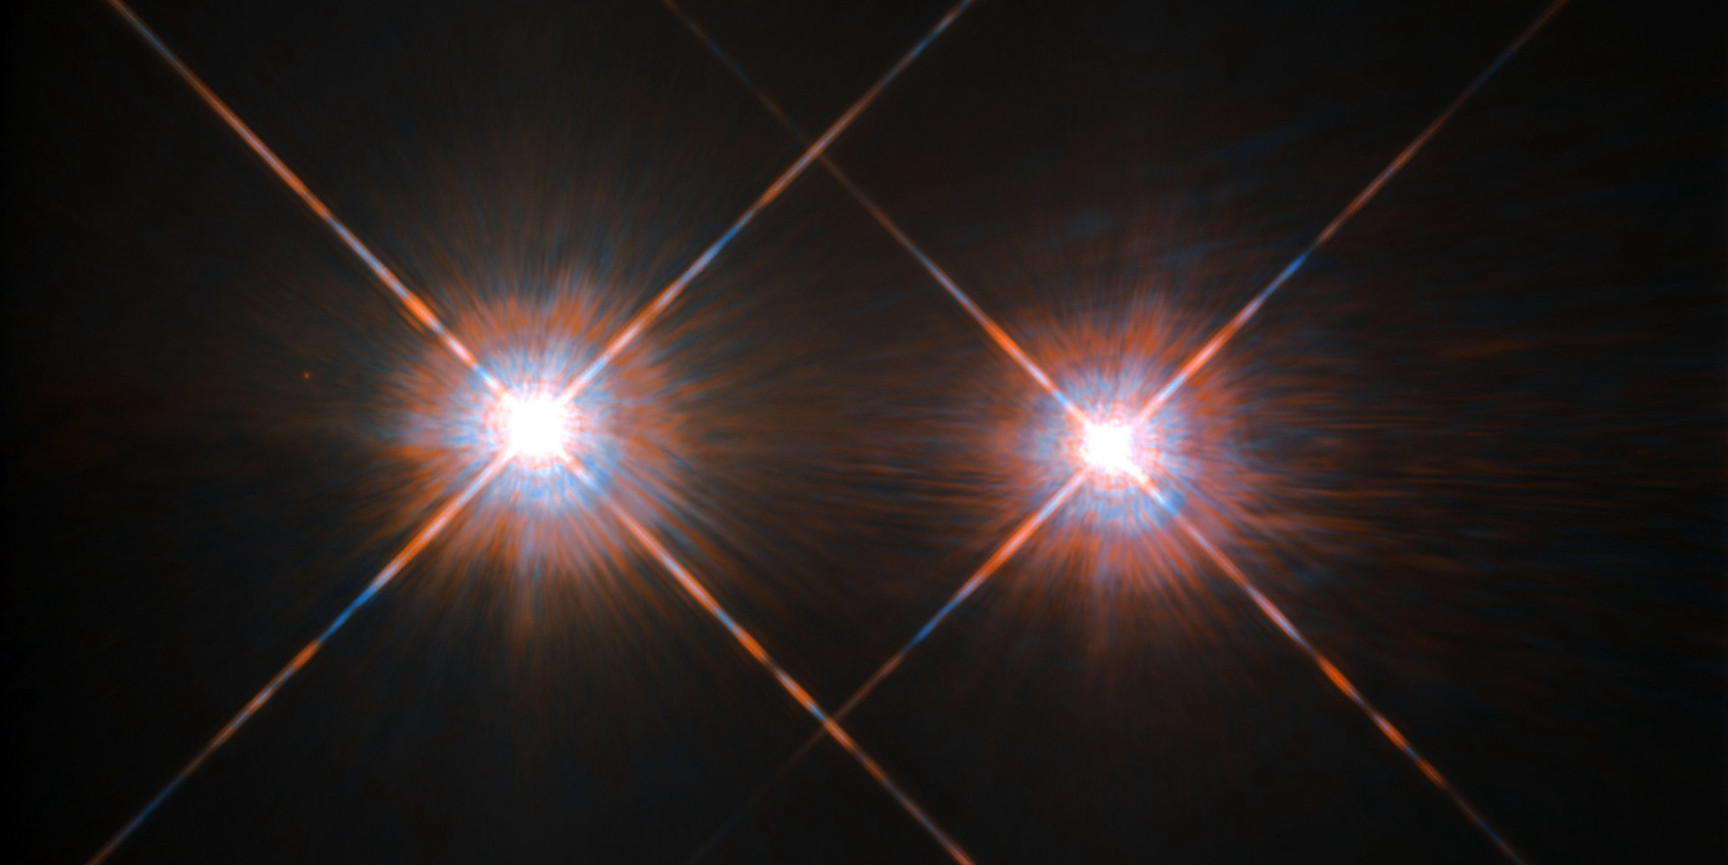 Image of α Centauri A and α Centauri B viewed by the Hubble Space Telescope